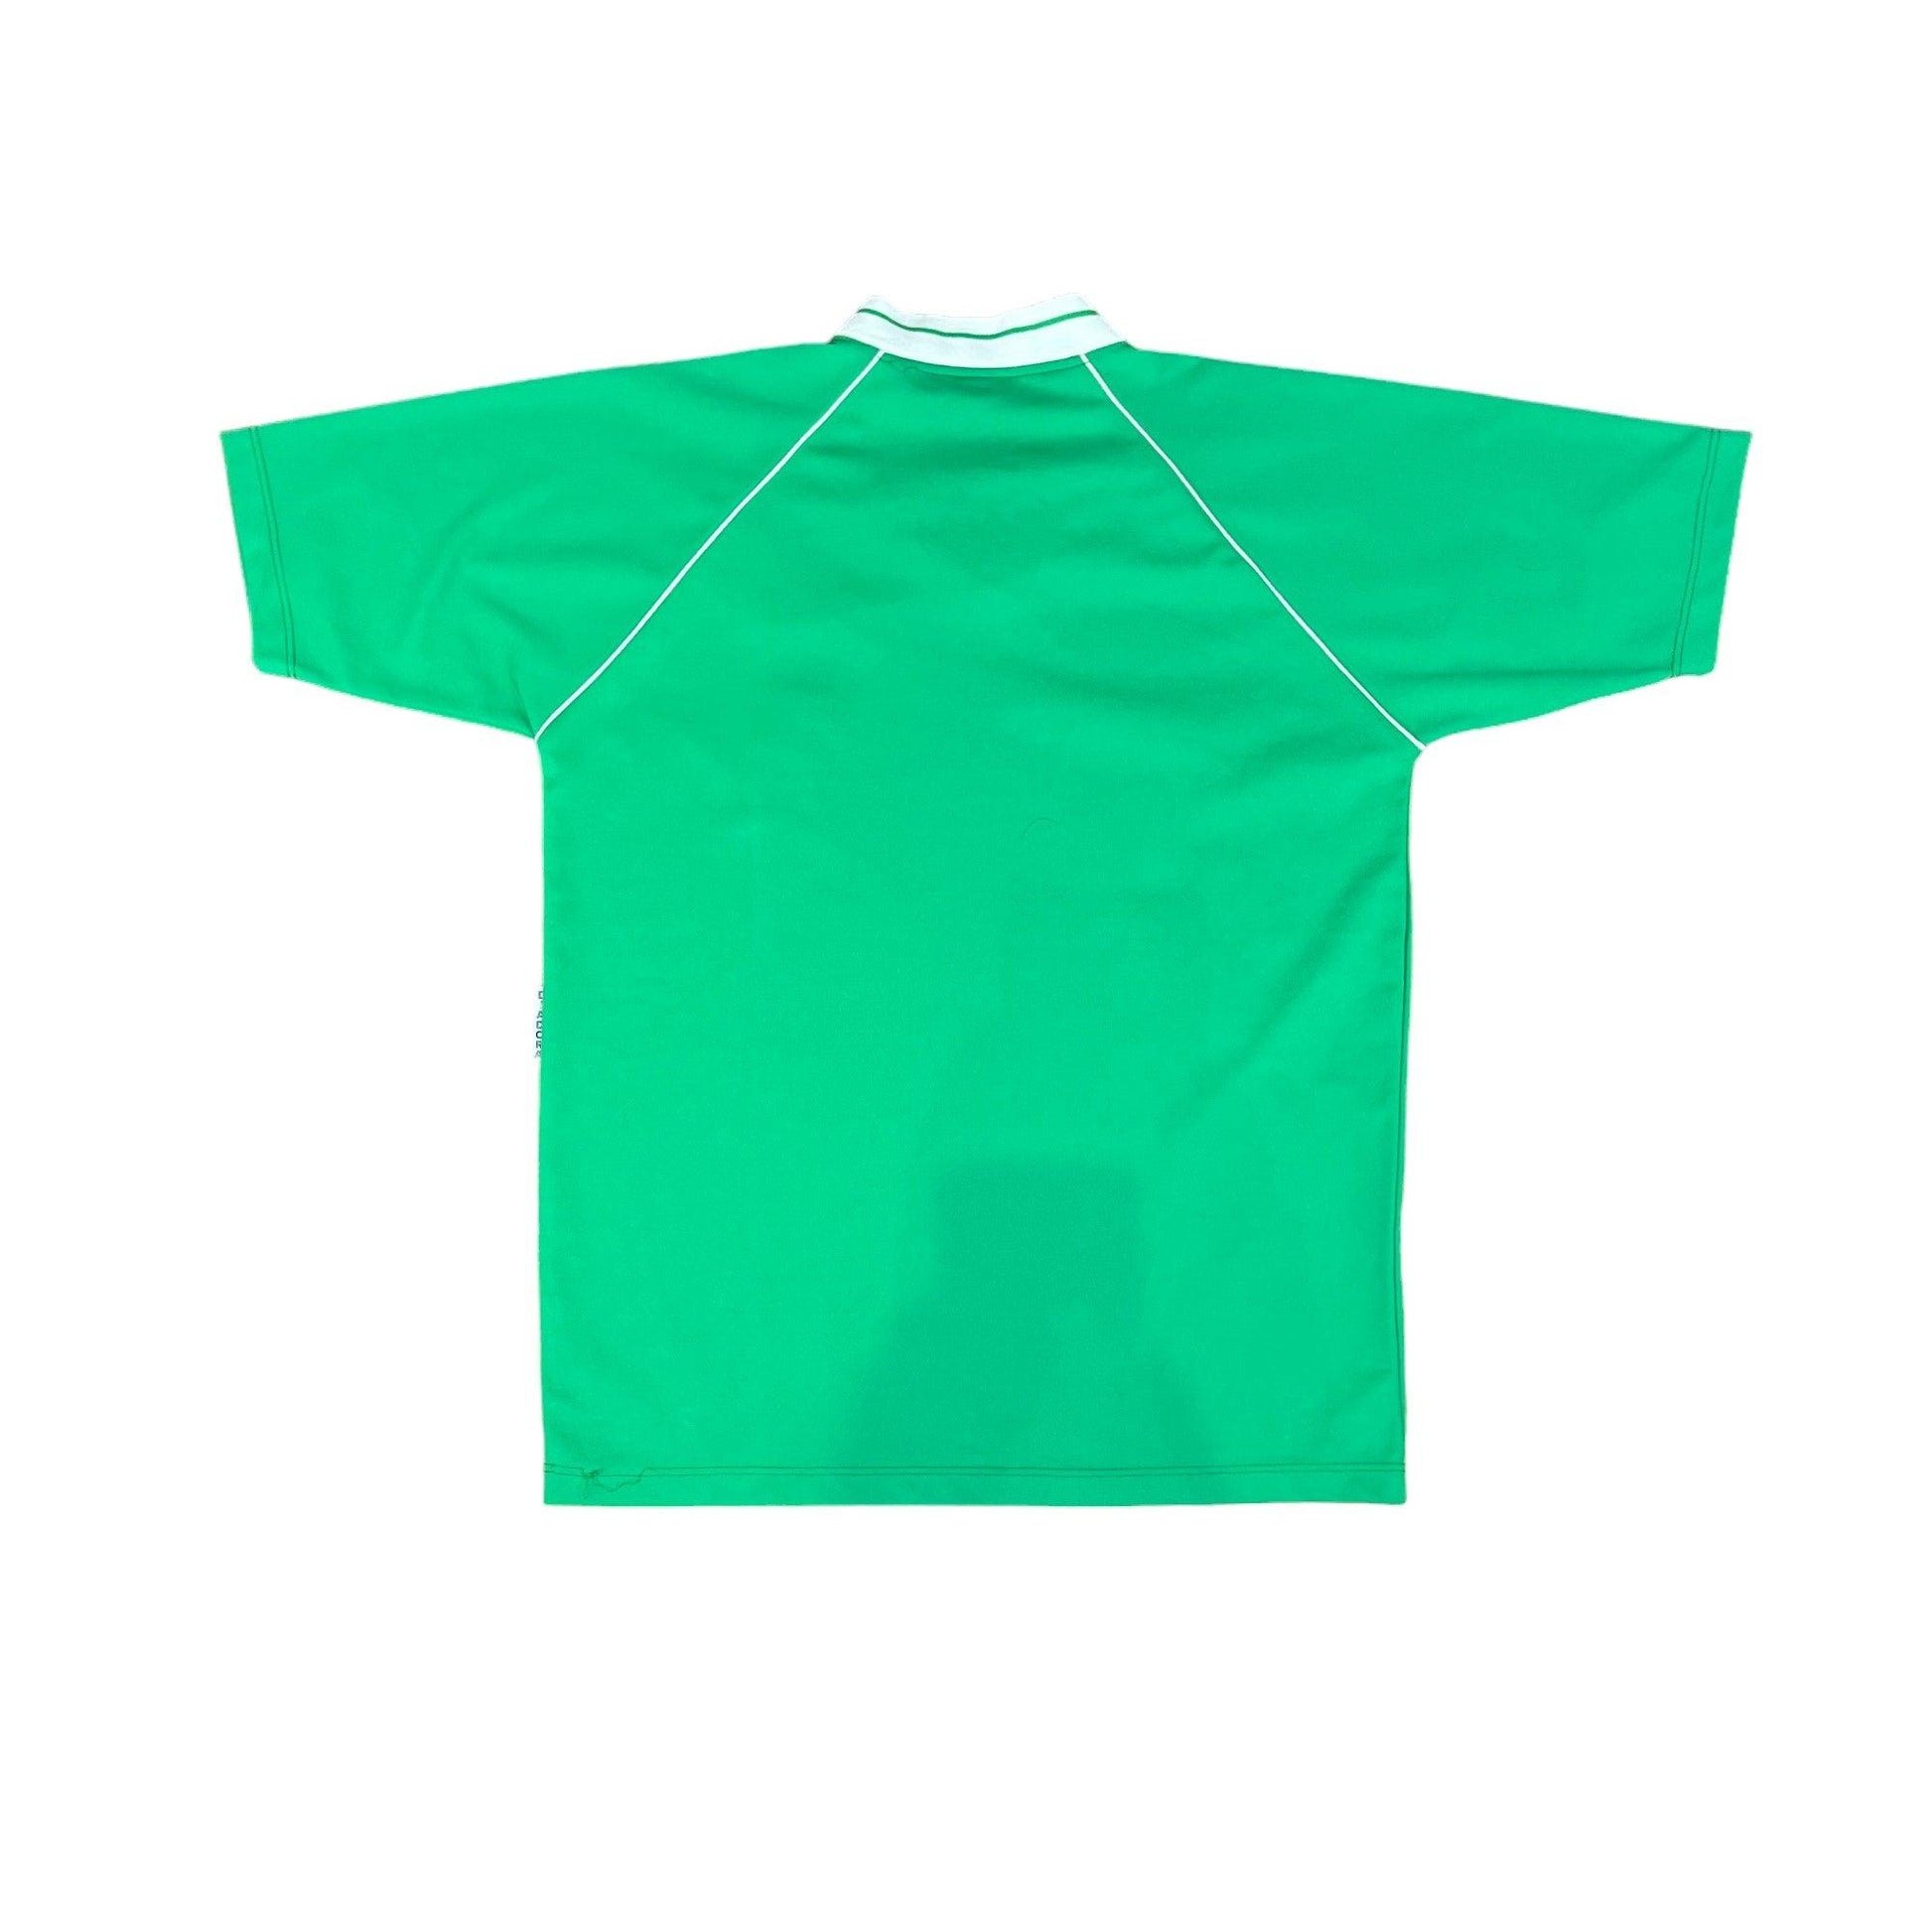 Vintage 90s Green Italy Tee - Extra Large - The Streetwear Studio